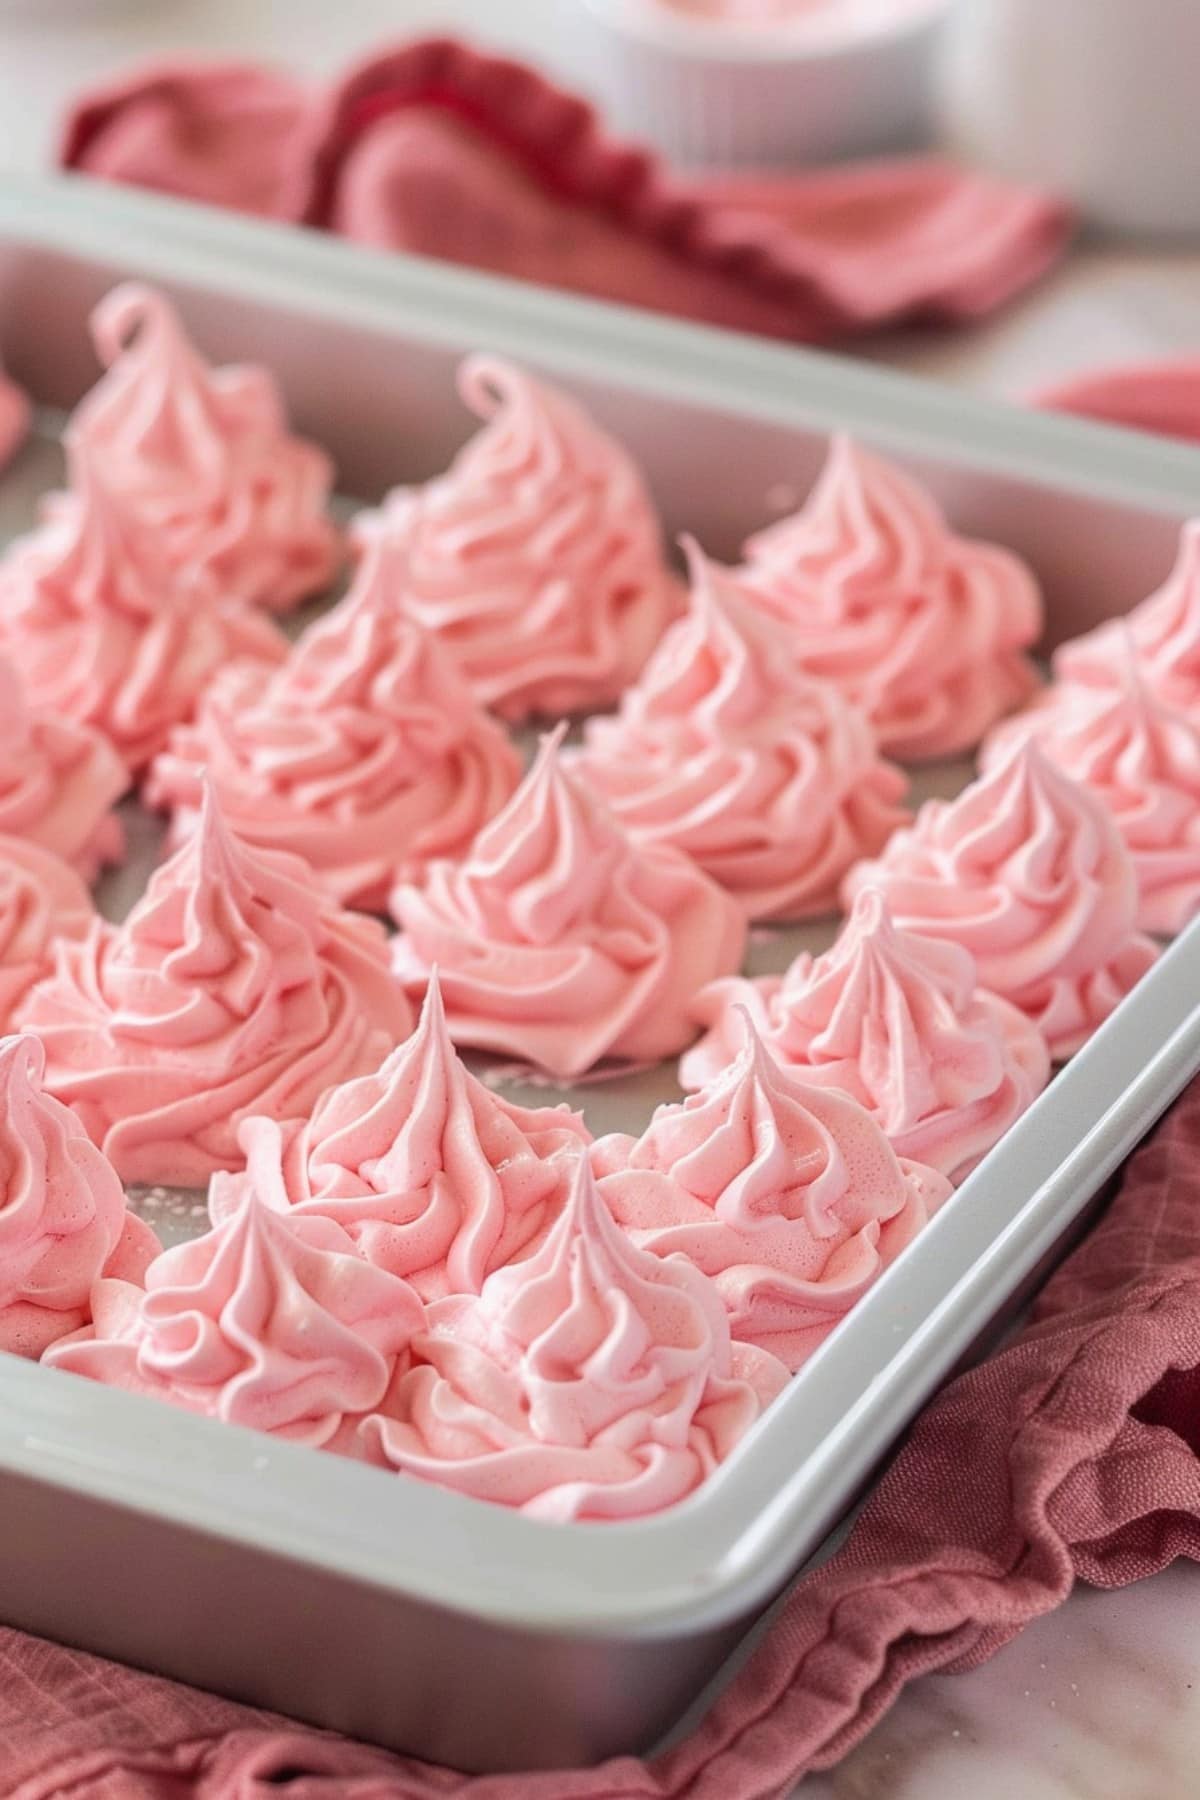 Fruity and fluffy homemade raspberry whipped cream frosting in a stainless tray